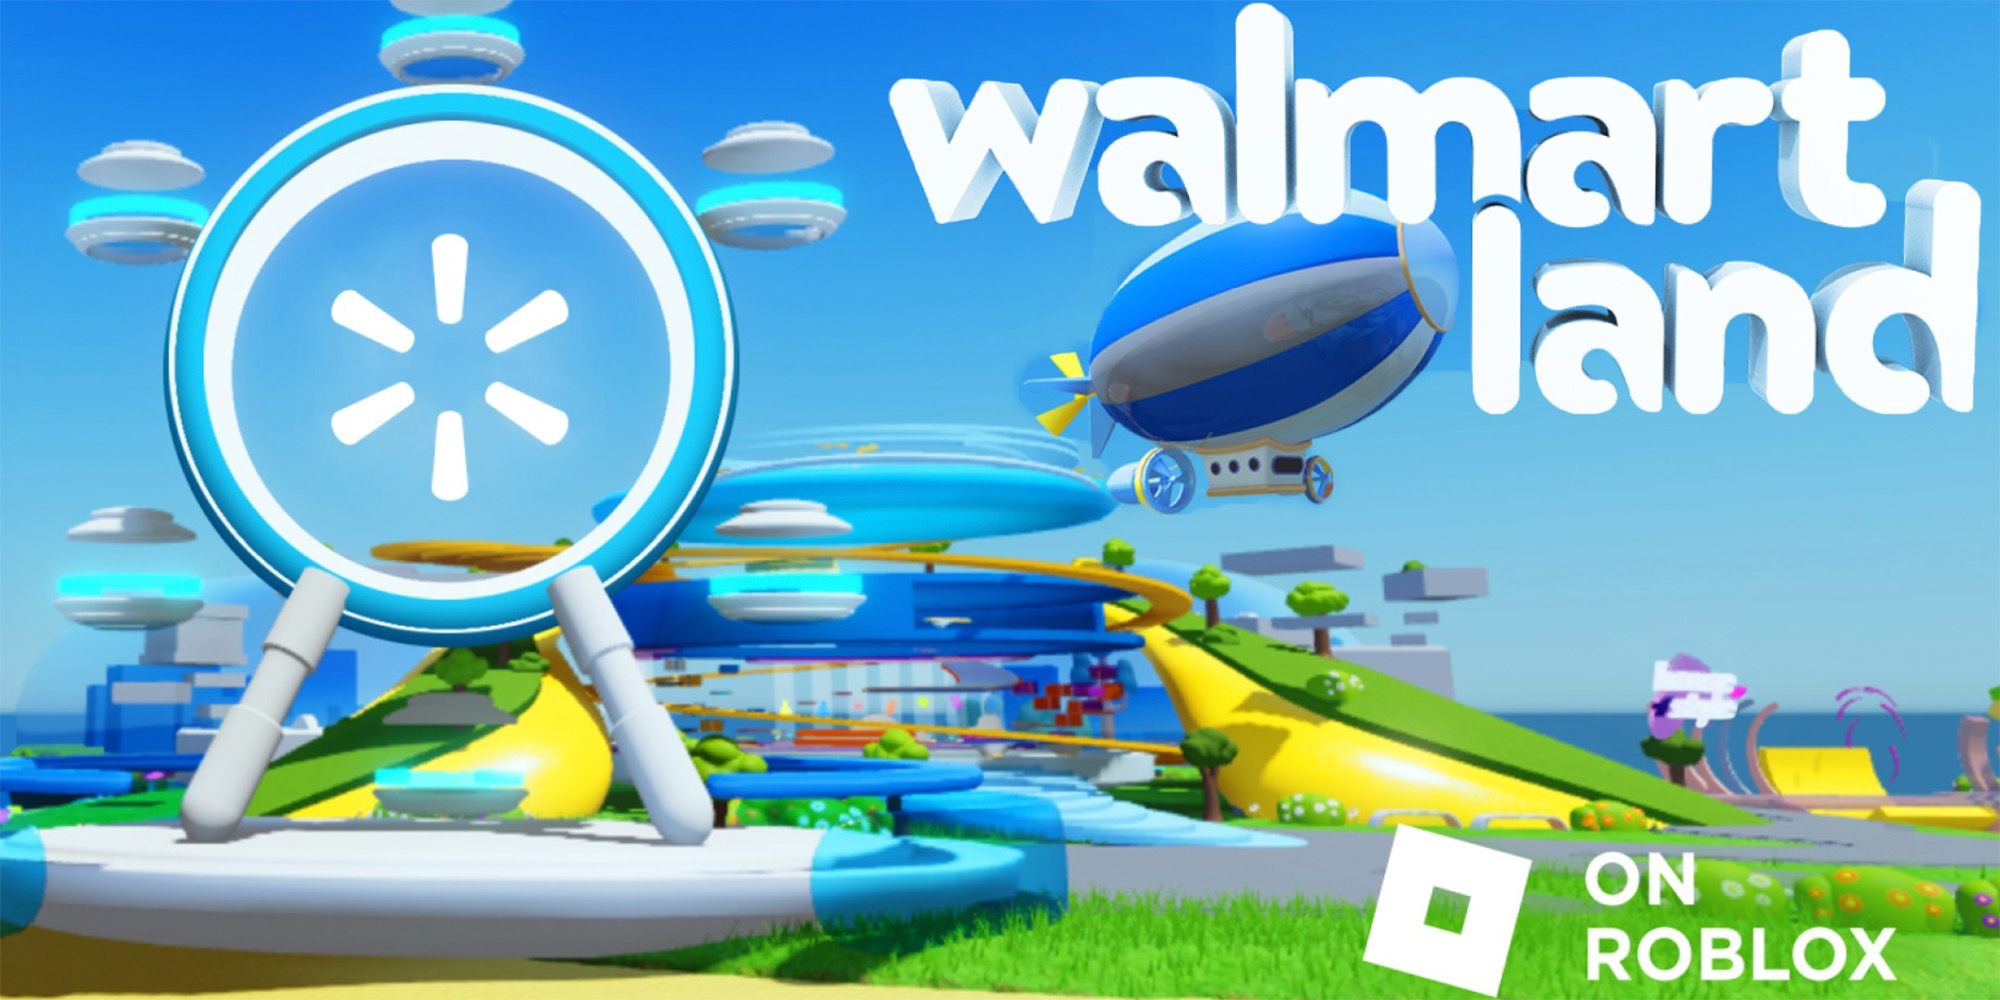 Walmart Enters The Metaverse With Two Worlds - Hunting Headlines